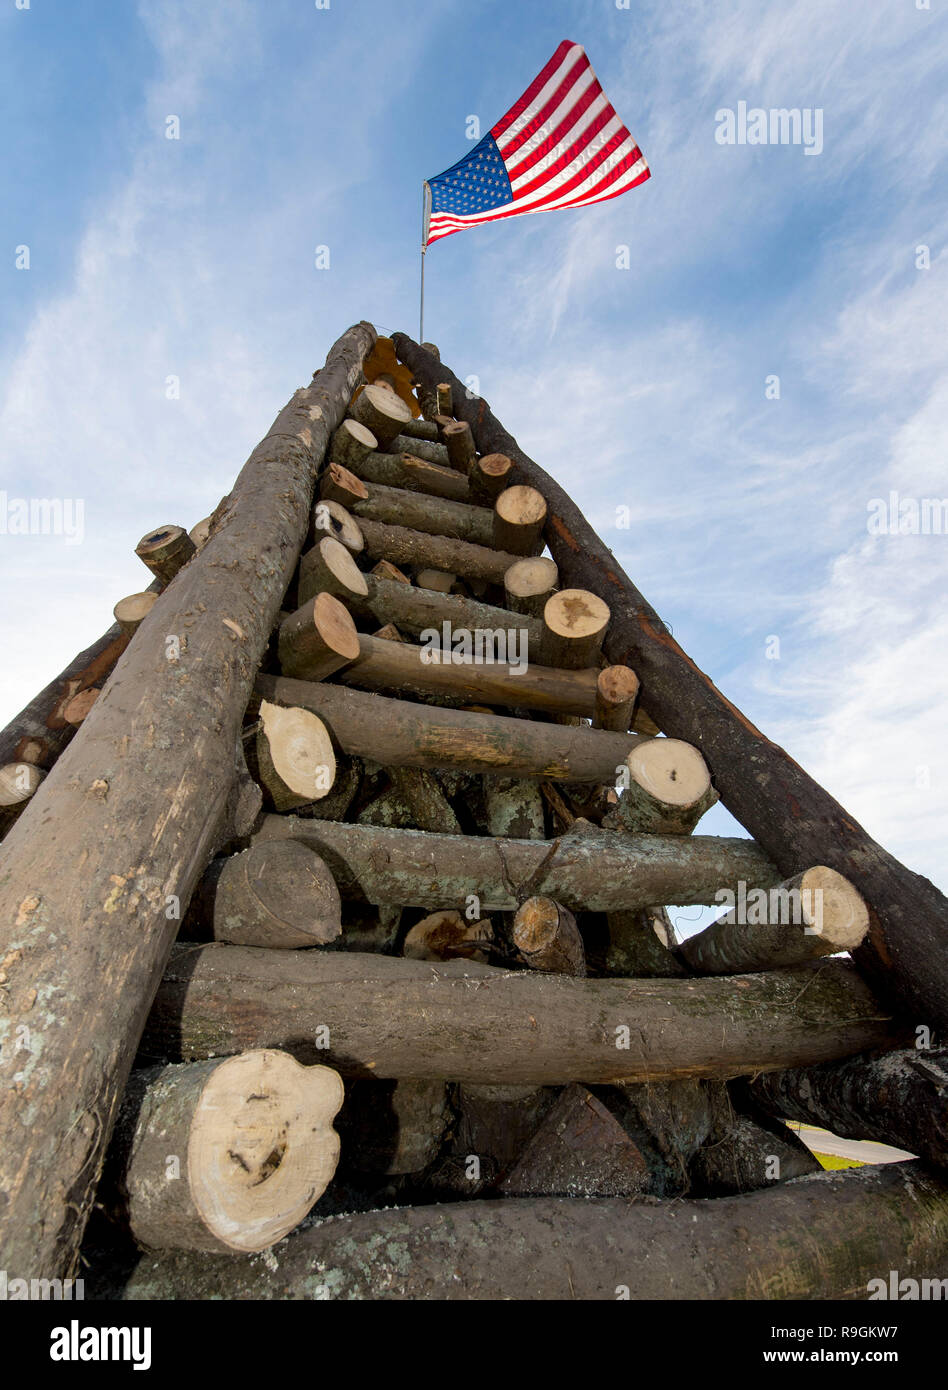 St. James Parish, Louisiana, USA. 21st Dec, 2018. On the earthen levees along the Great River Road between New Orleans and Baton Rouge, 15-foot-high log structures are constructed each December by the residents of Gramercy, Lutcher and Paulina. These bonfire structures are ceremoniously set ablaze on Christmas Eve to help guide the route of ''Papa Noel, '' as Santa Claus is known among the Cajun population. Credit: Brian Cahn/ZUMA Wire/Alamy Live News Stock Photo